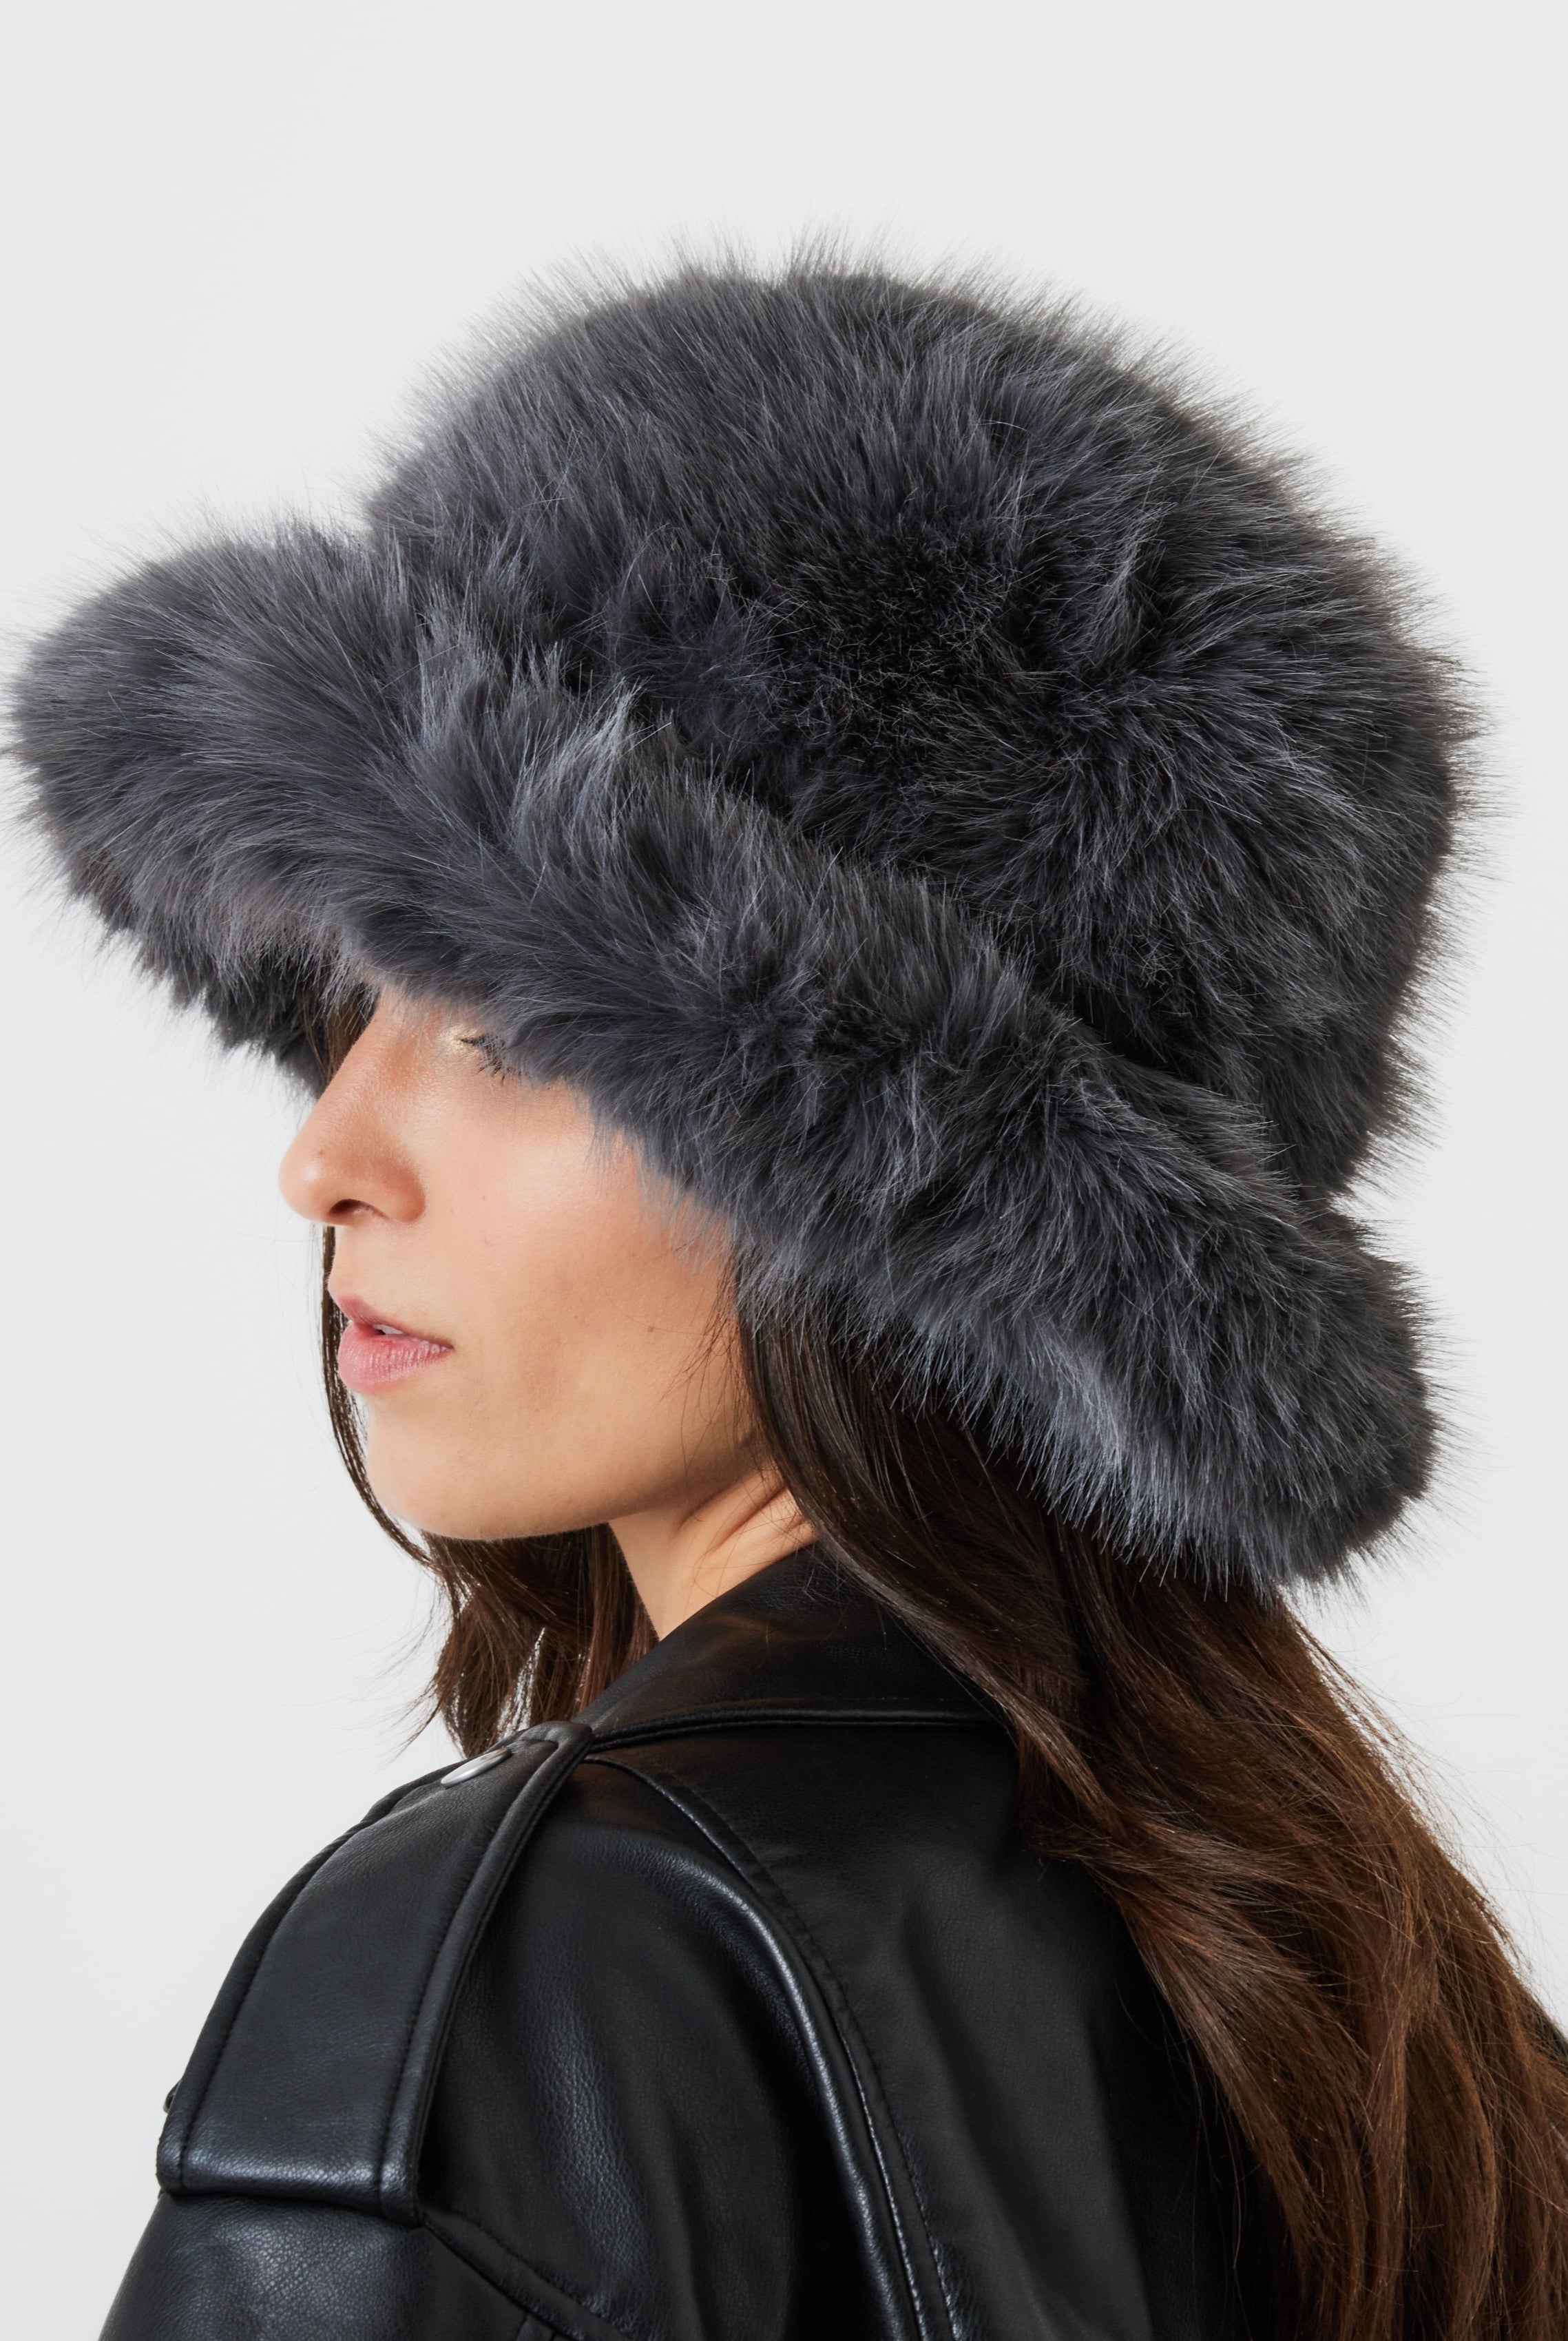 Oversized fur Bucket Hat in Grey | Hats | Hat | Winter | Autumn | Fall | Accessories | Cold weather | Ski | Oversized Fur Hat | Fluffy | Fluffy Fur Hat | Faux Fur | Vegan | Streetwear | Accessories | Women's Accessories